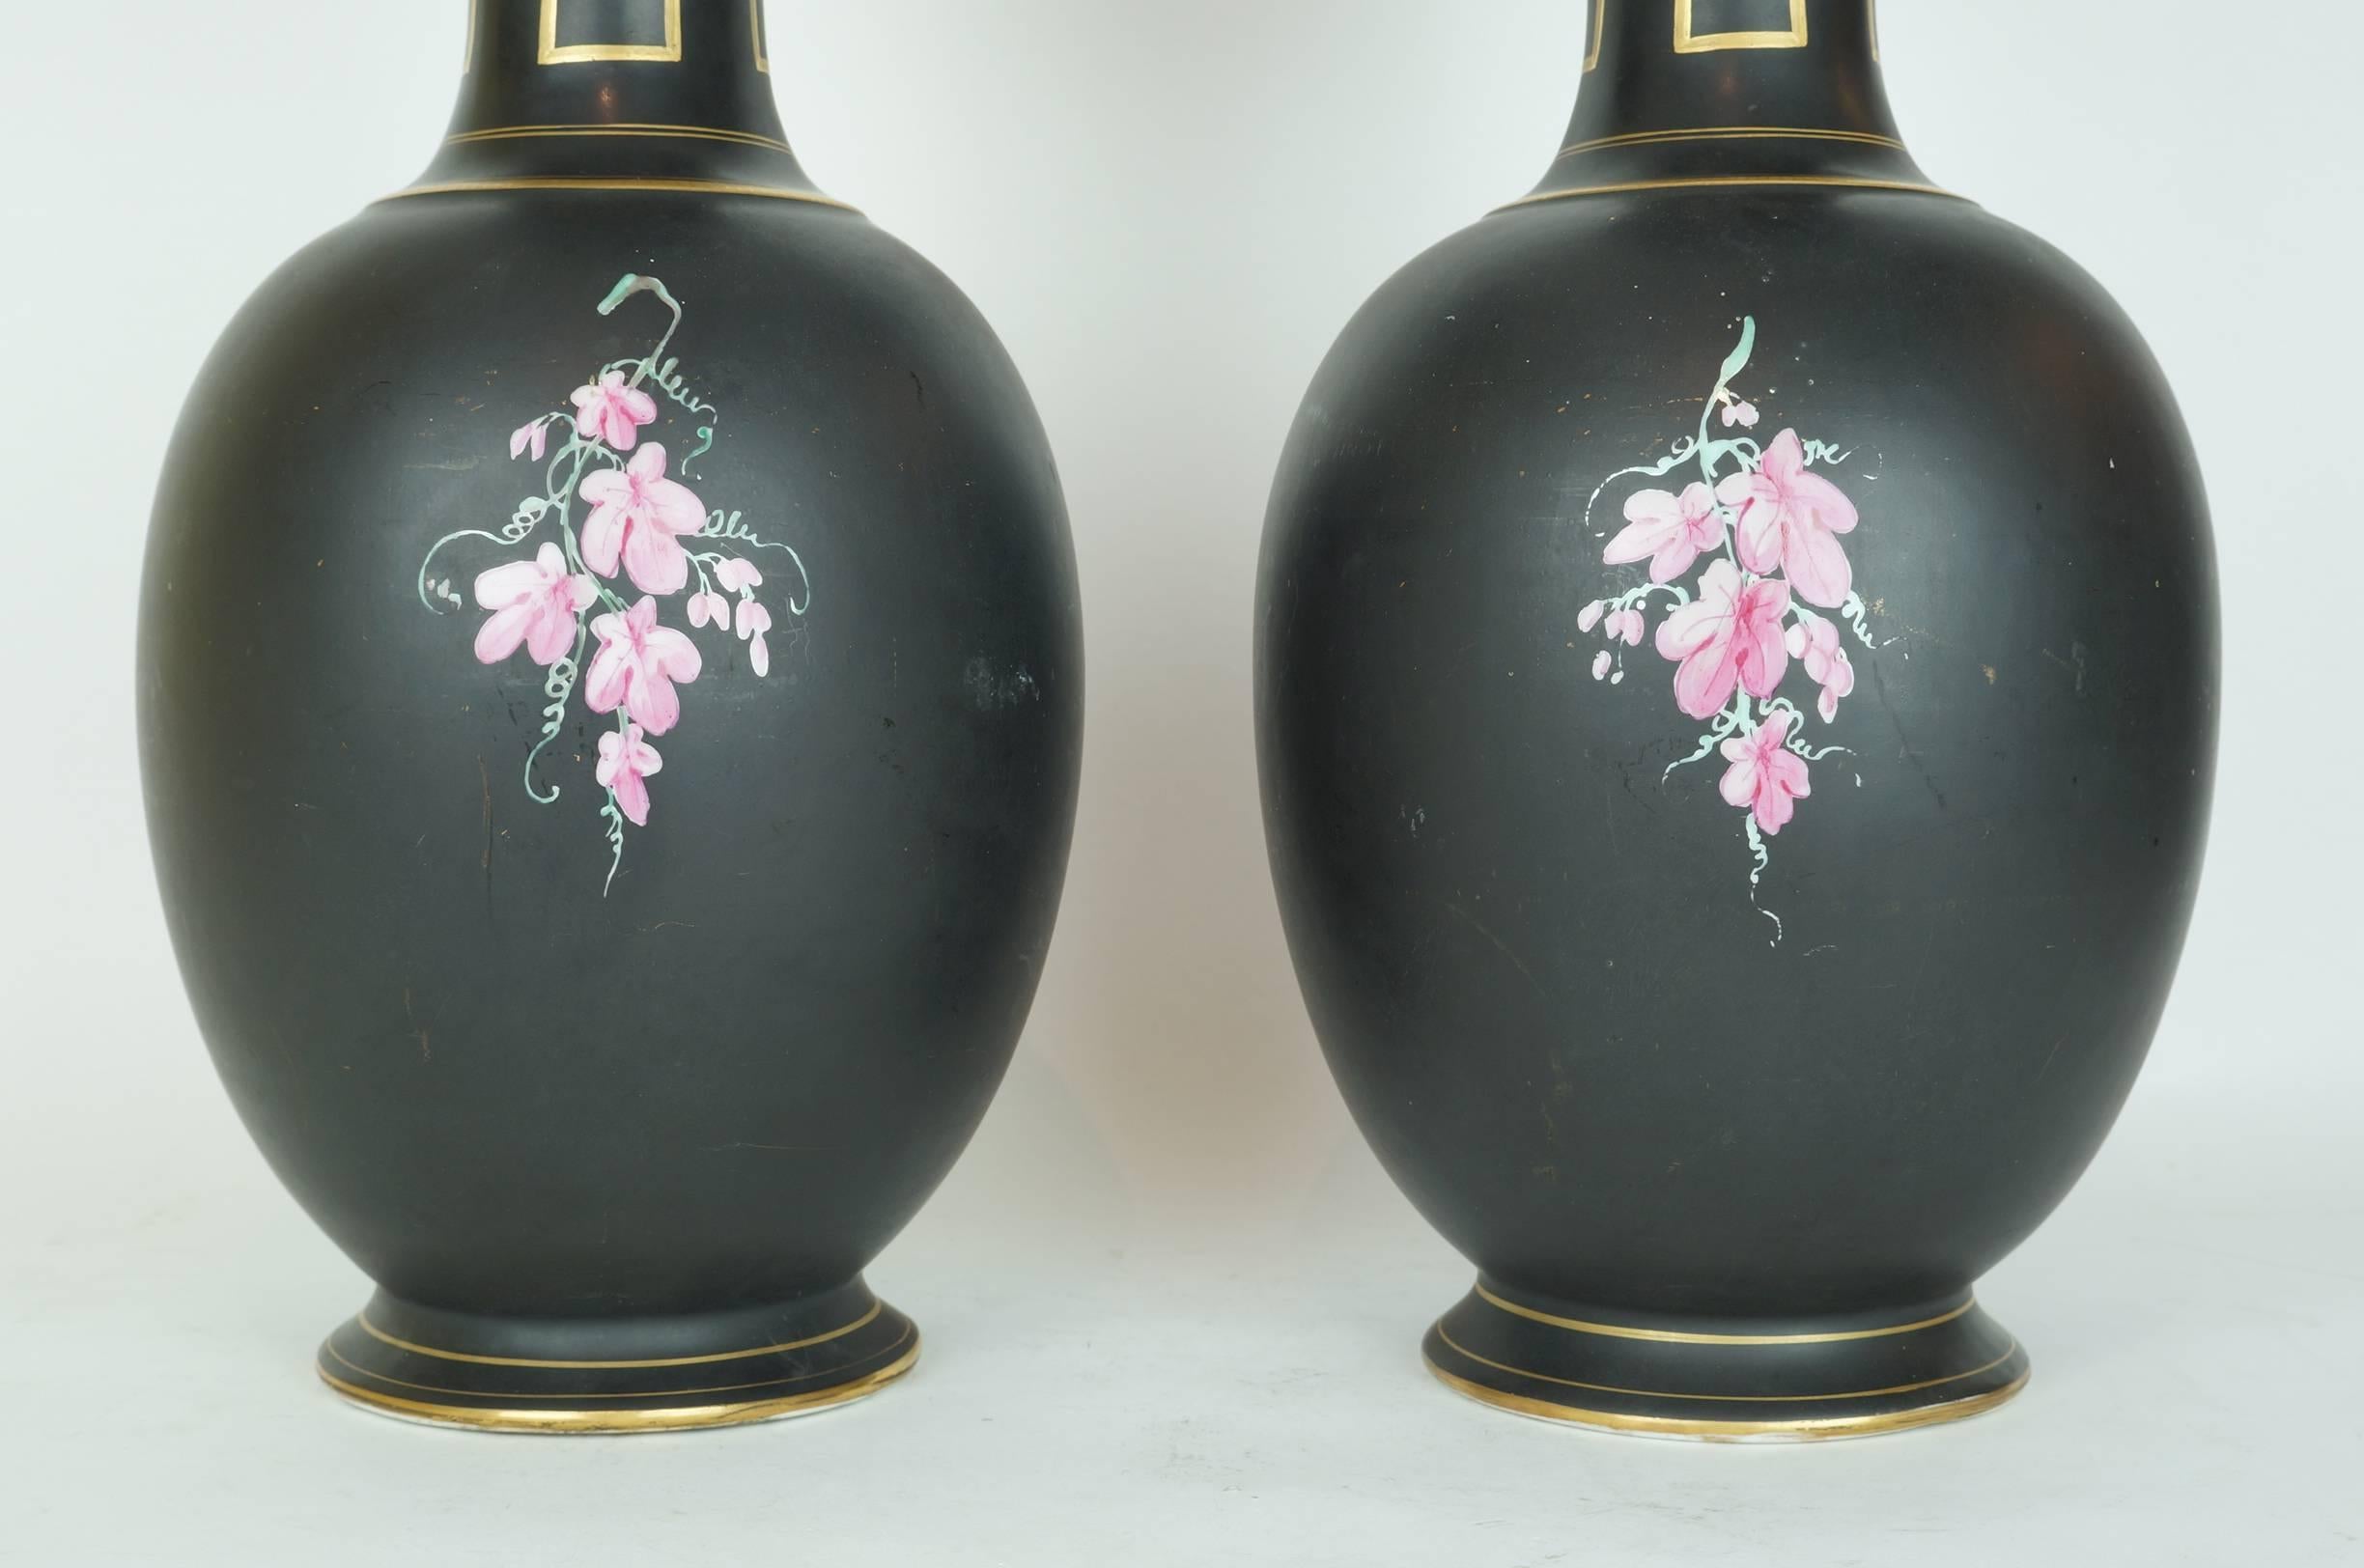 French Pair of Neoclassical Porcelain Vases with Painted Portrait and Floral Decoration